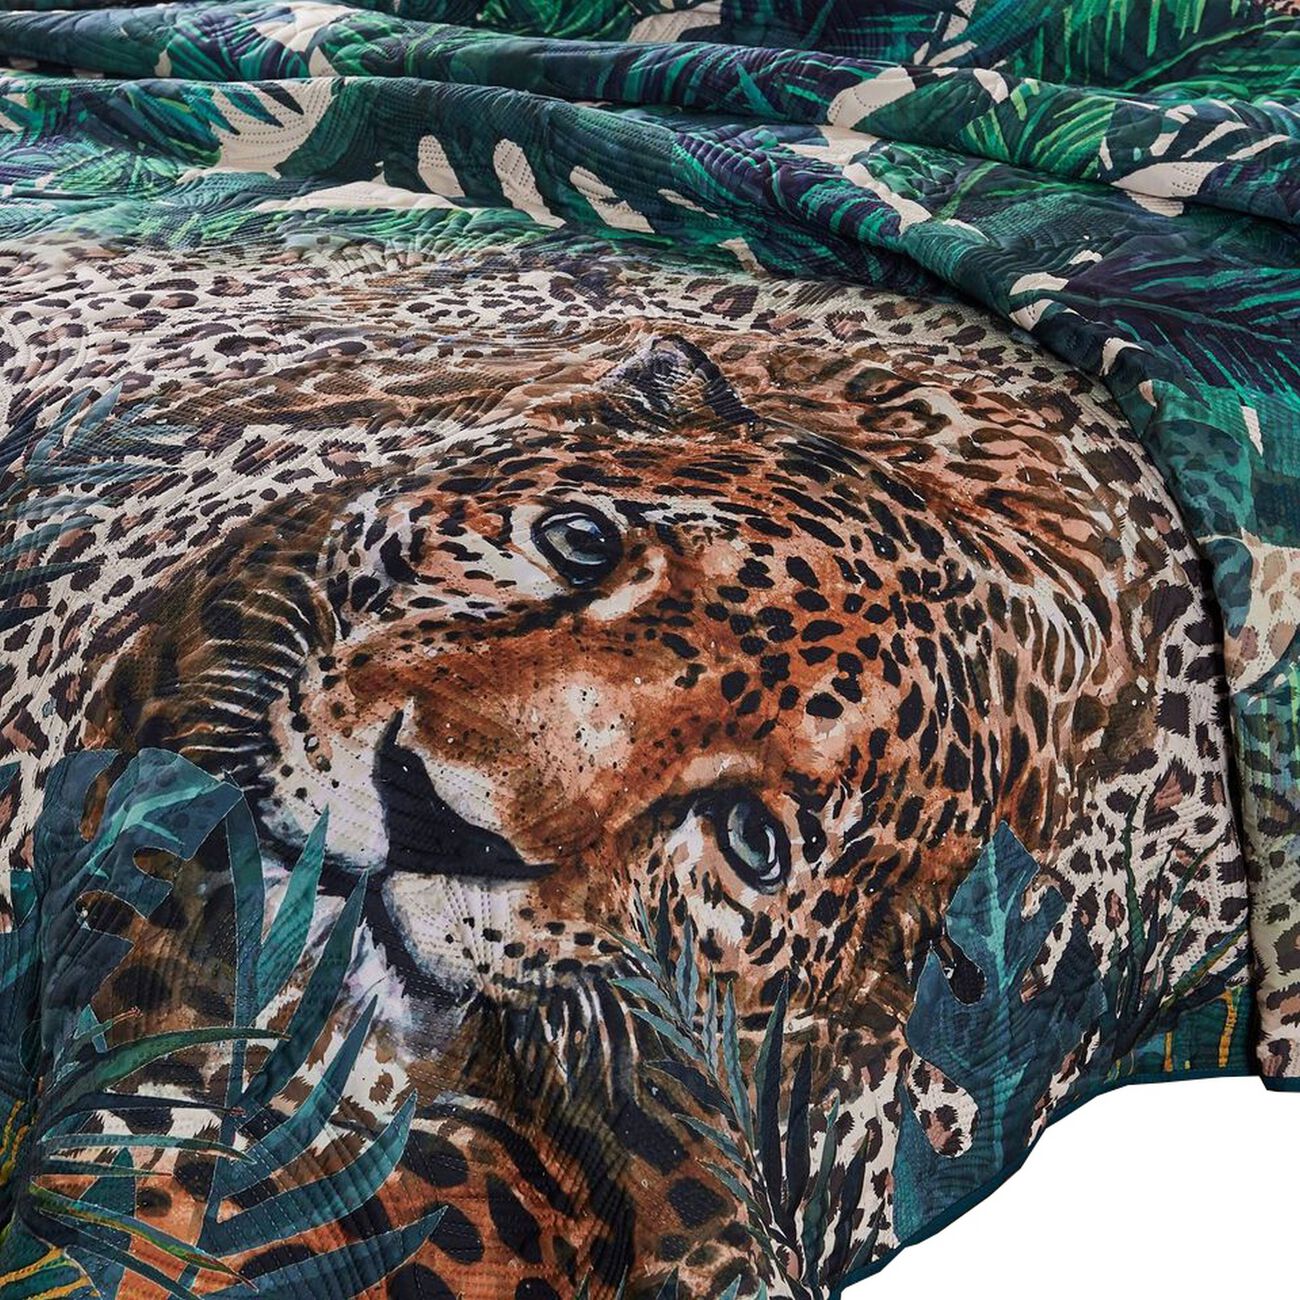 Nore 3 Piece King Quilt Set with Jungle Feline Print, Green